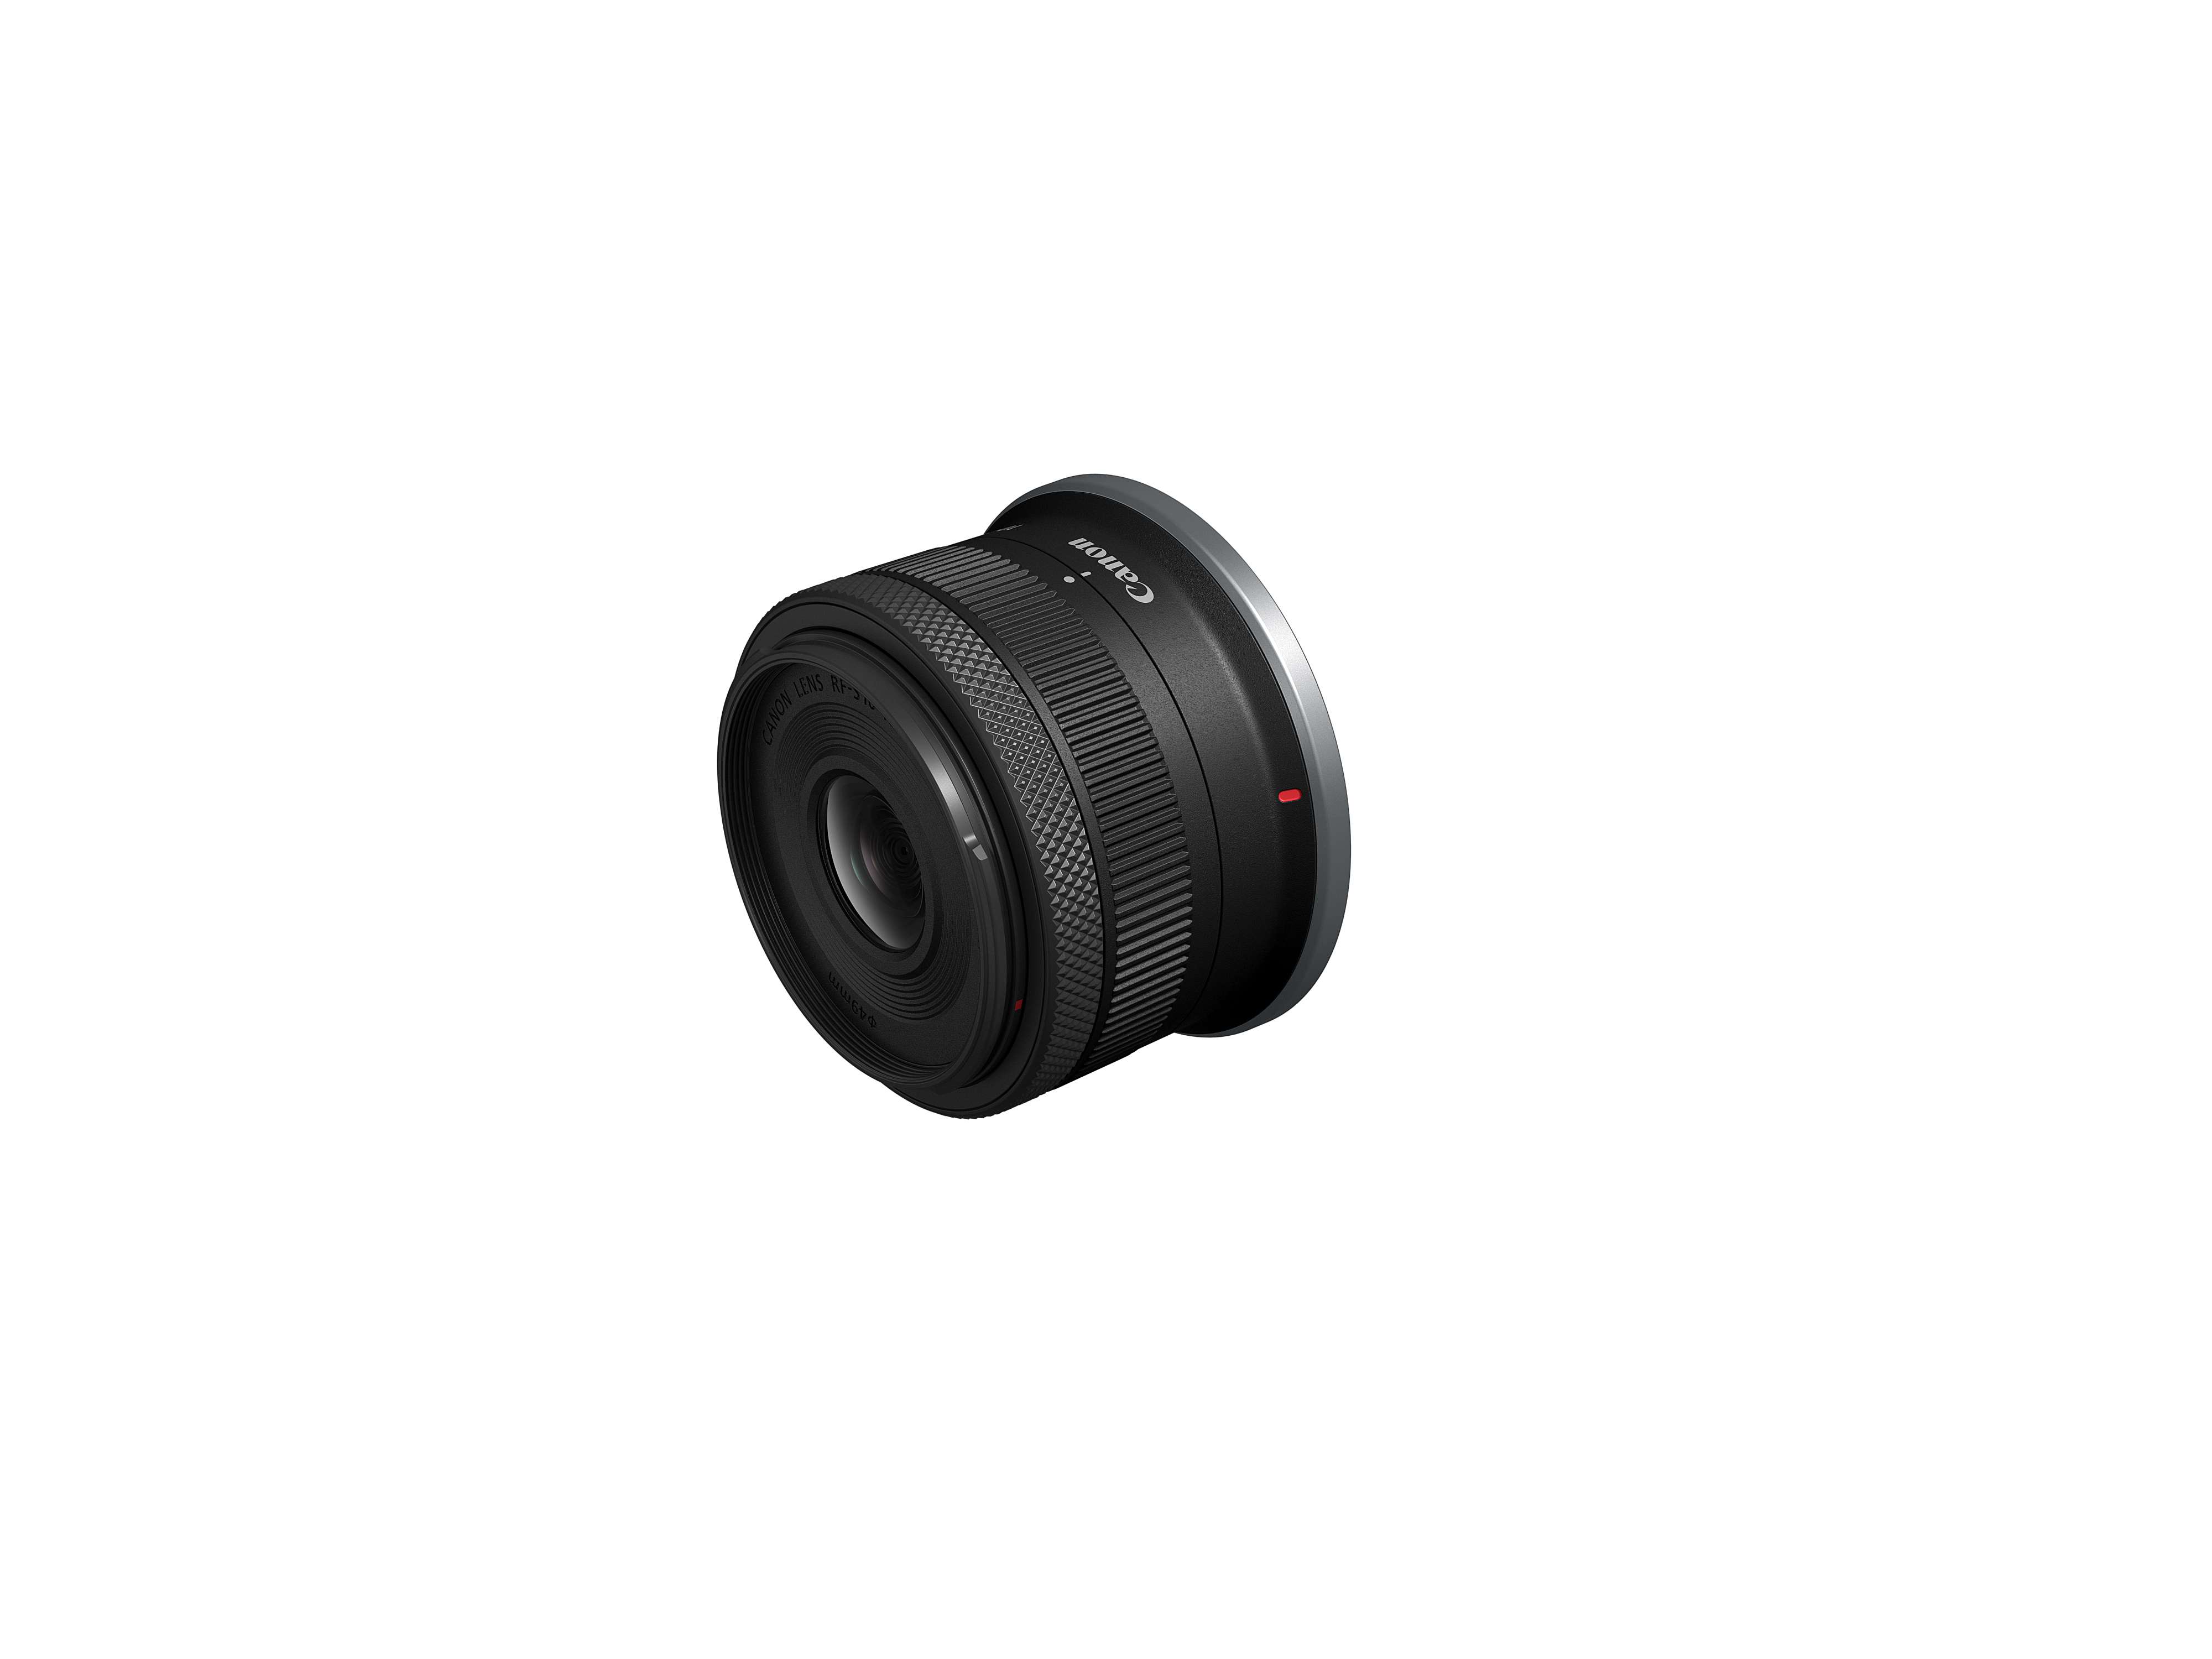 Canon’s Lightest Ultra-Wide-Angle Zoom Lens Expands Options for APS-C Users